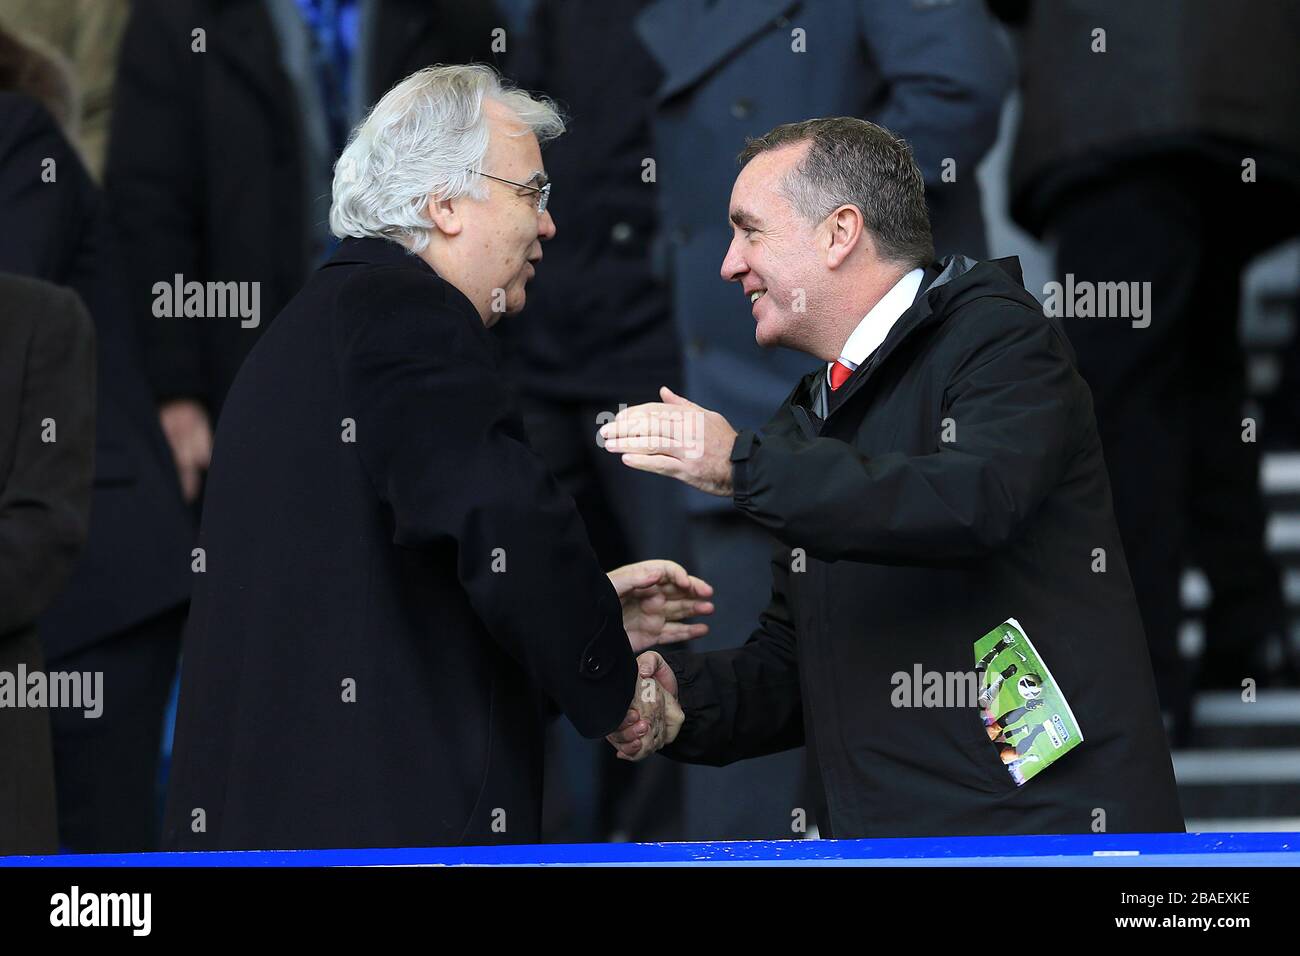 Everton chairman Bill Kenwright (left) shakes hands with Liverpool managing director Ian Ayre (right) in the stands Stock Photo